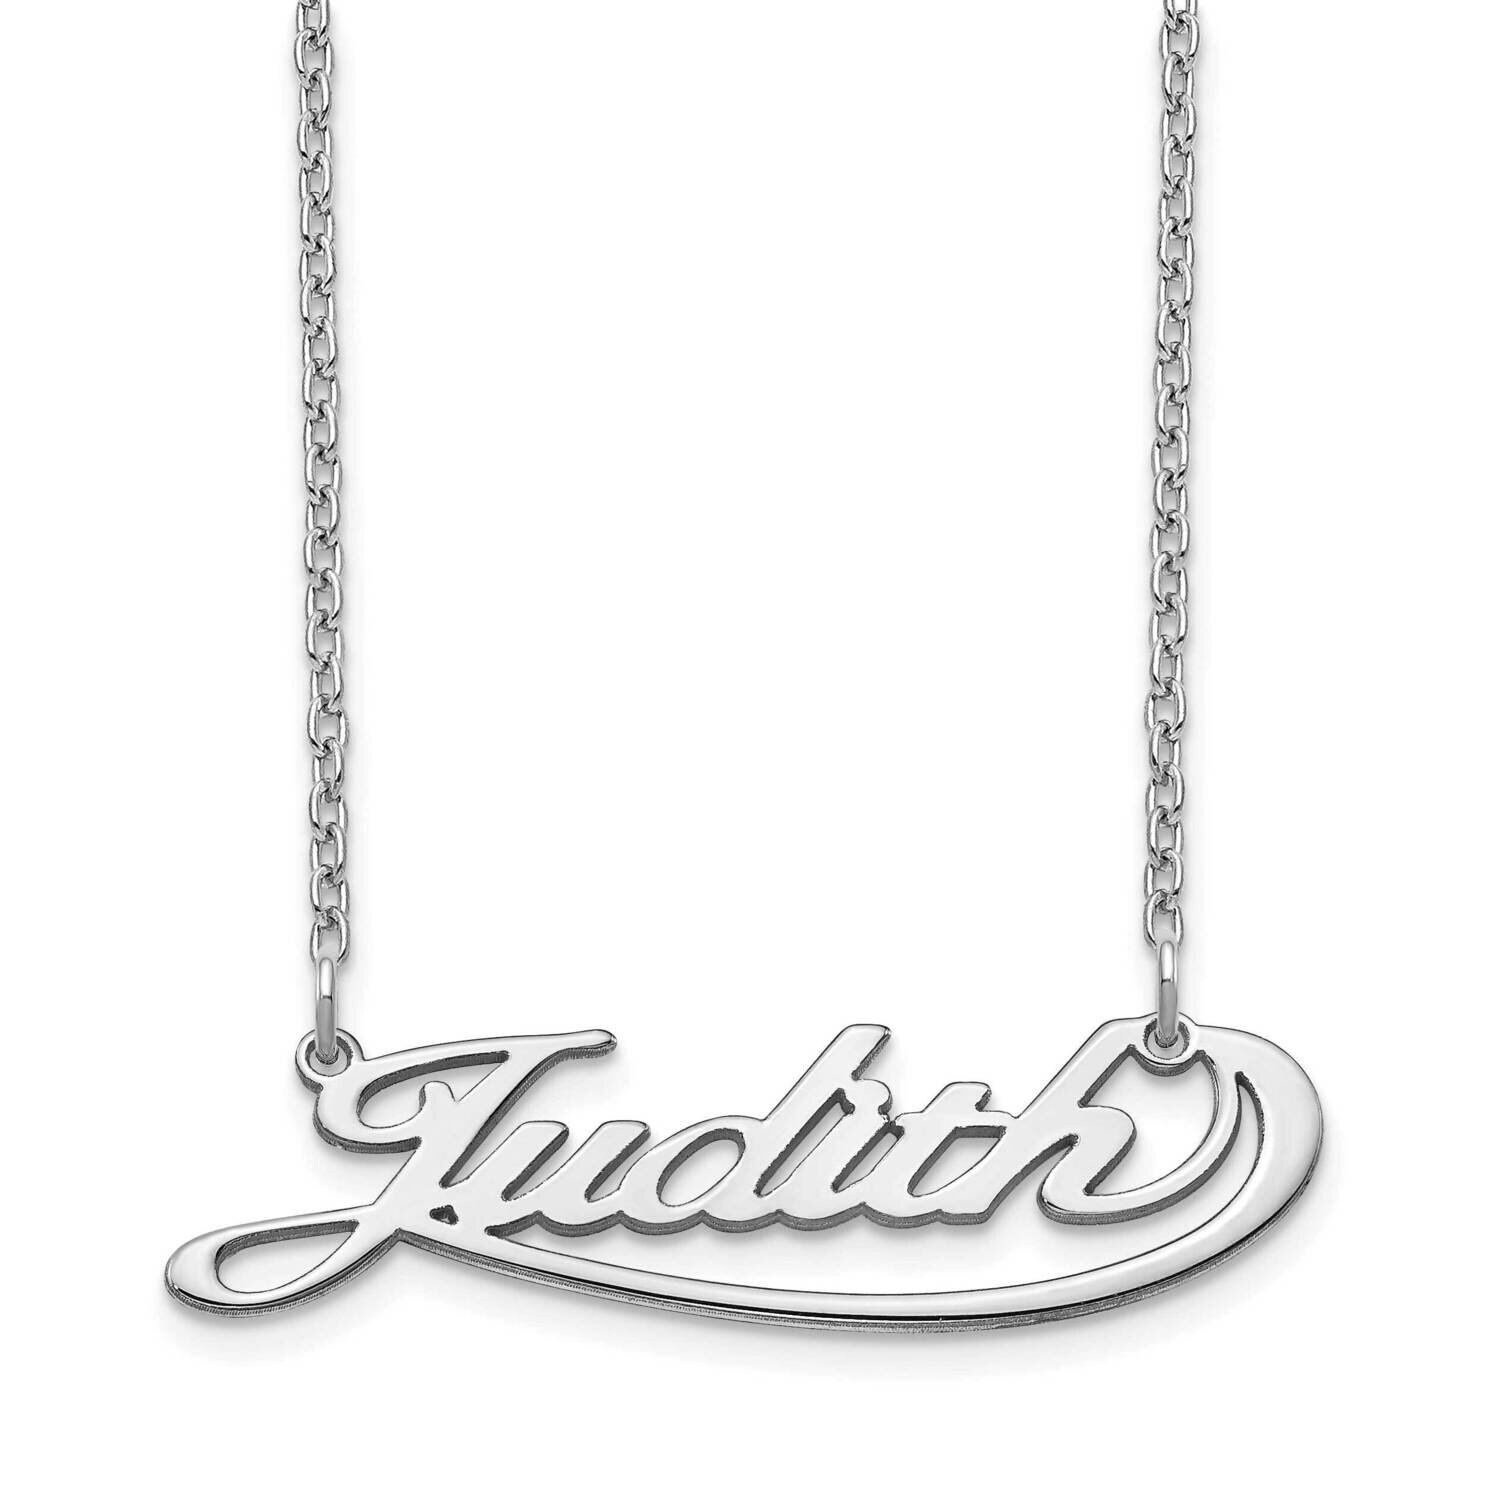 Under Swoop Nameplate Necklace 10k White Gold 10XNA946W